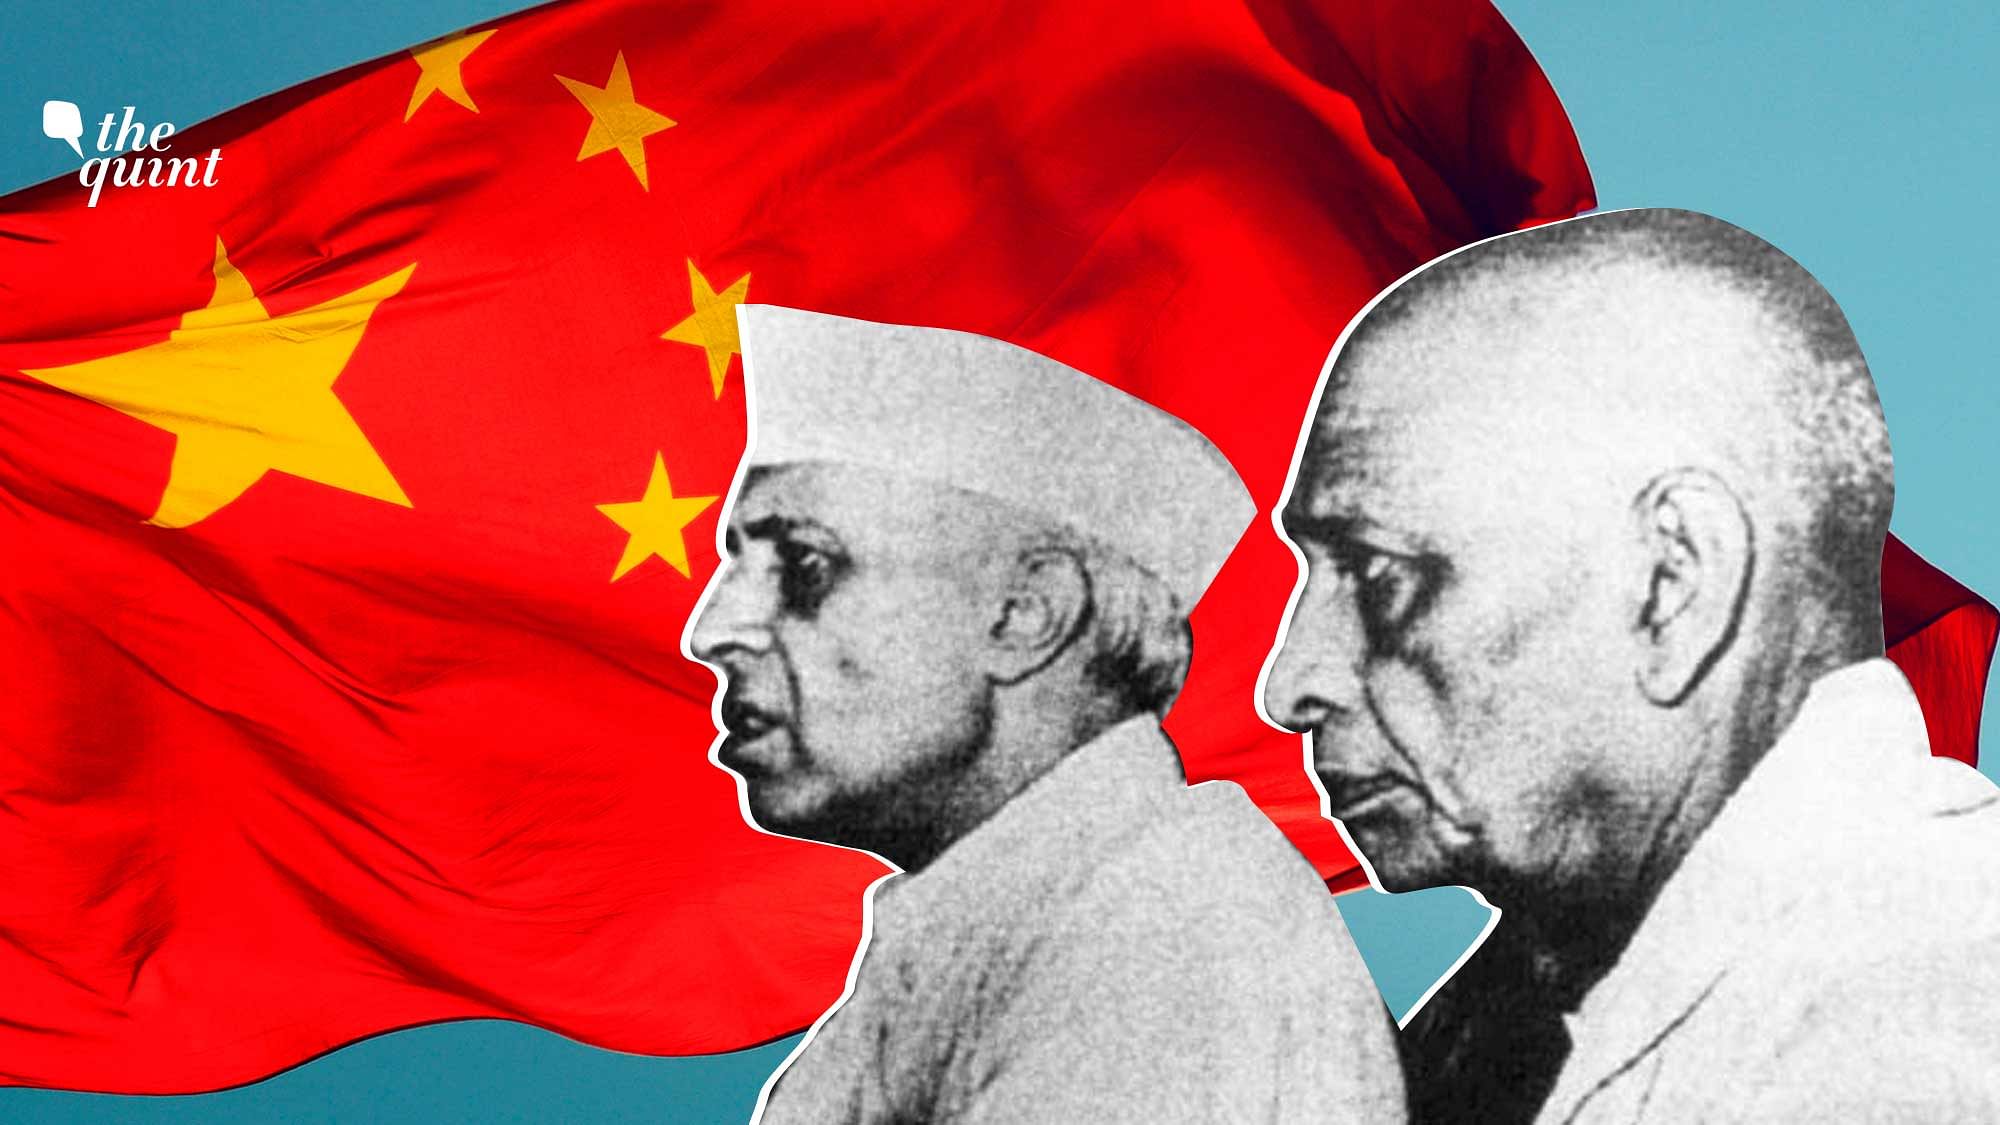 Image of Chinese flag and Nehru &amp; Sardar Patel used for representational purposes.